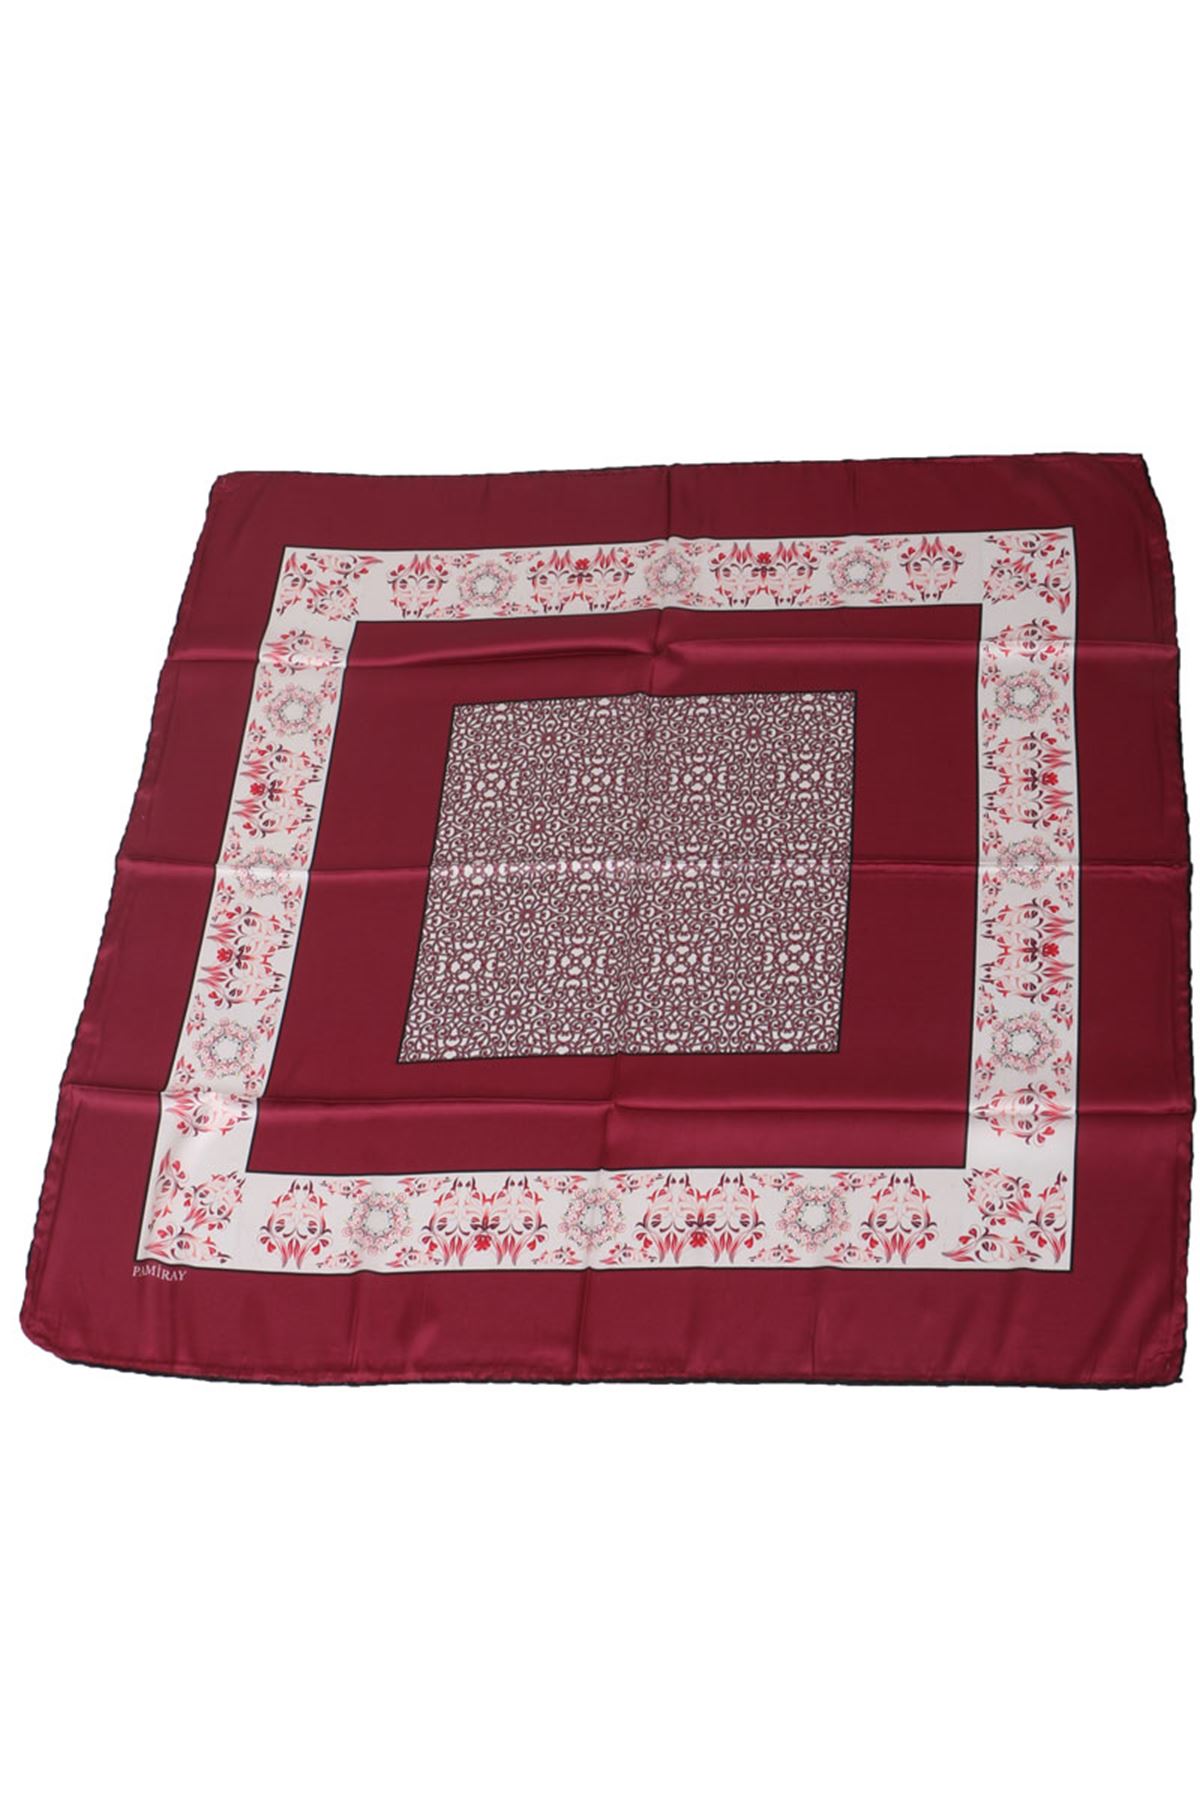 17127 Ethnic Patterned Rayon Scarf - Cherry